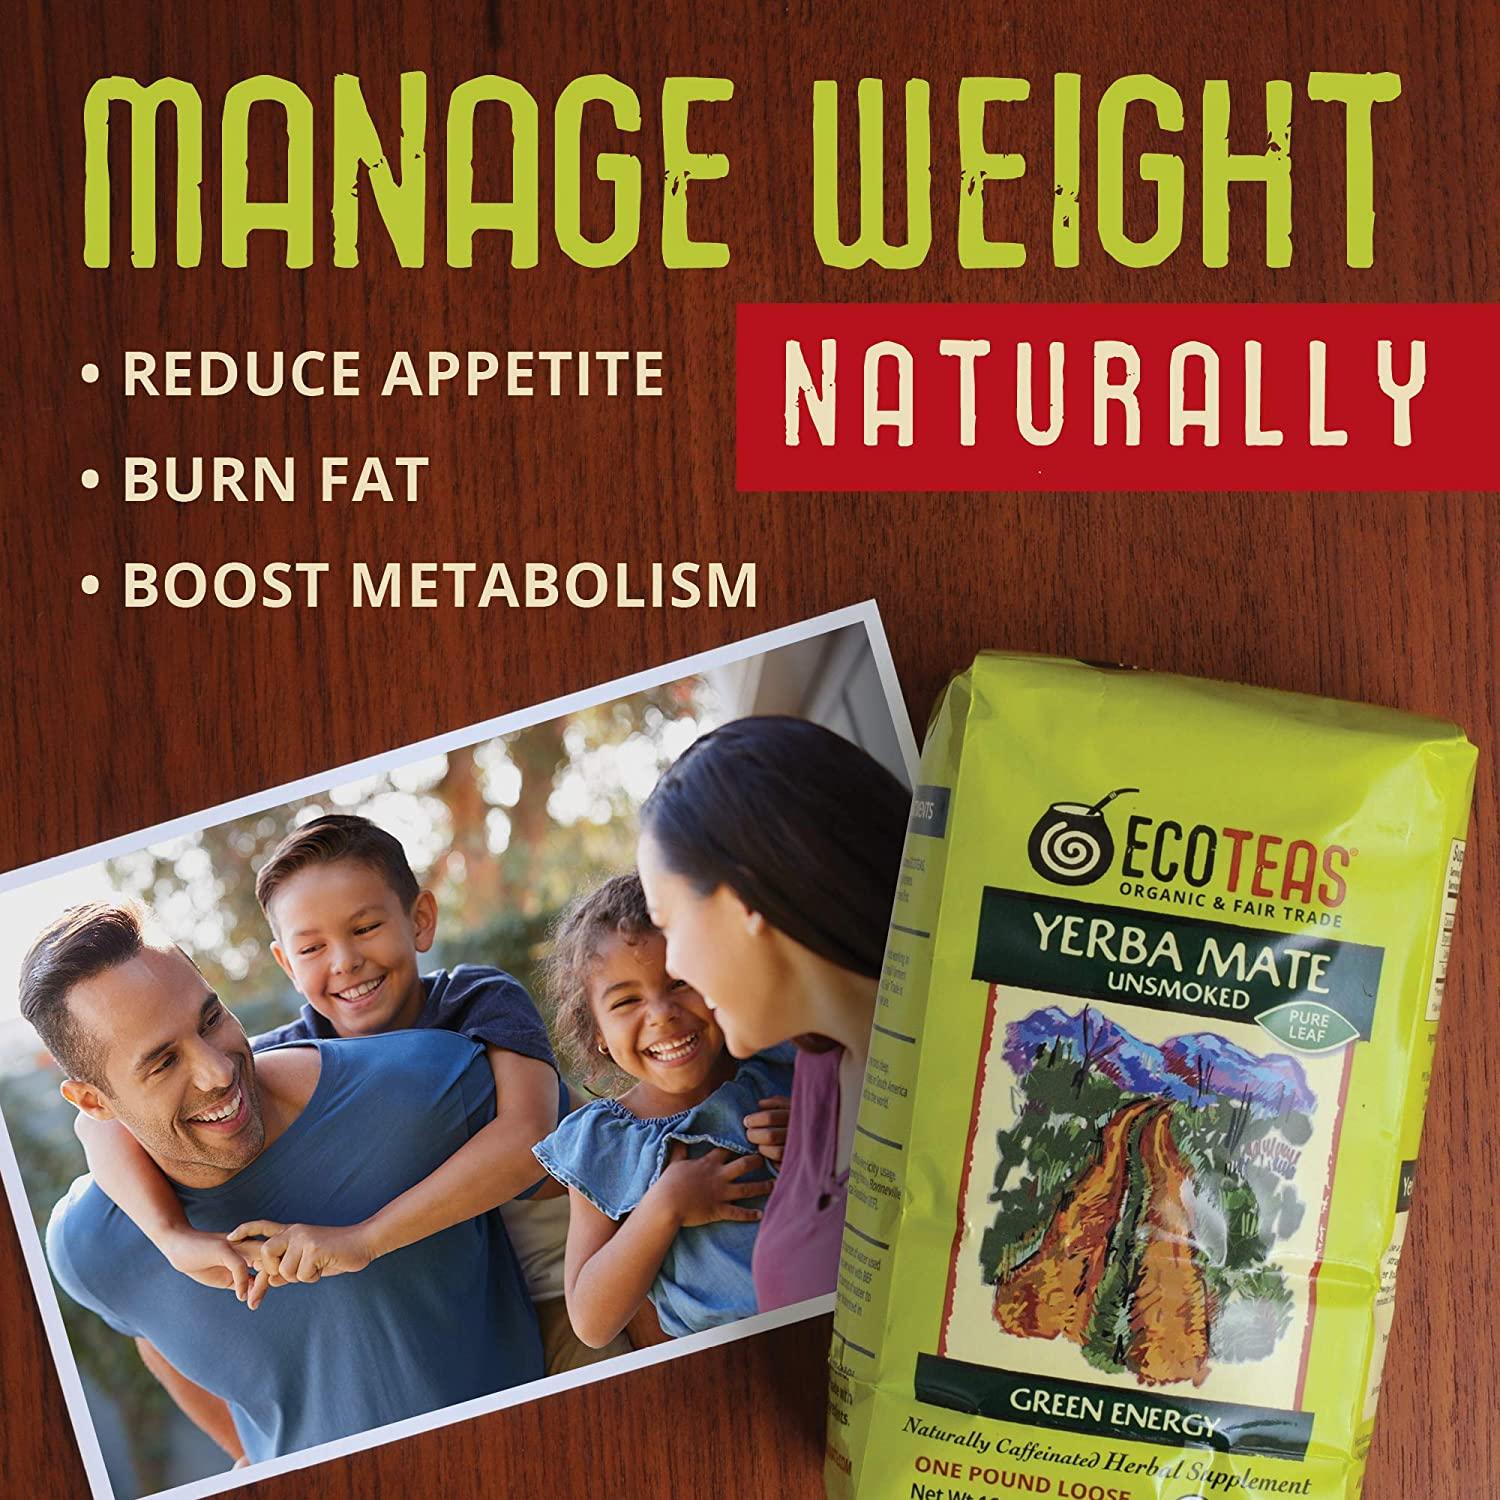 Does yerba mate help with weight loss?